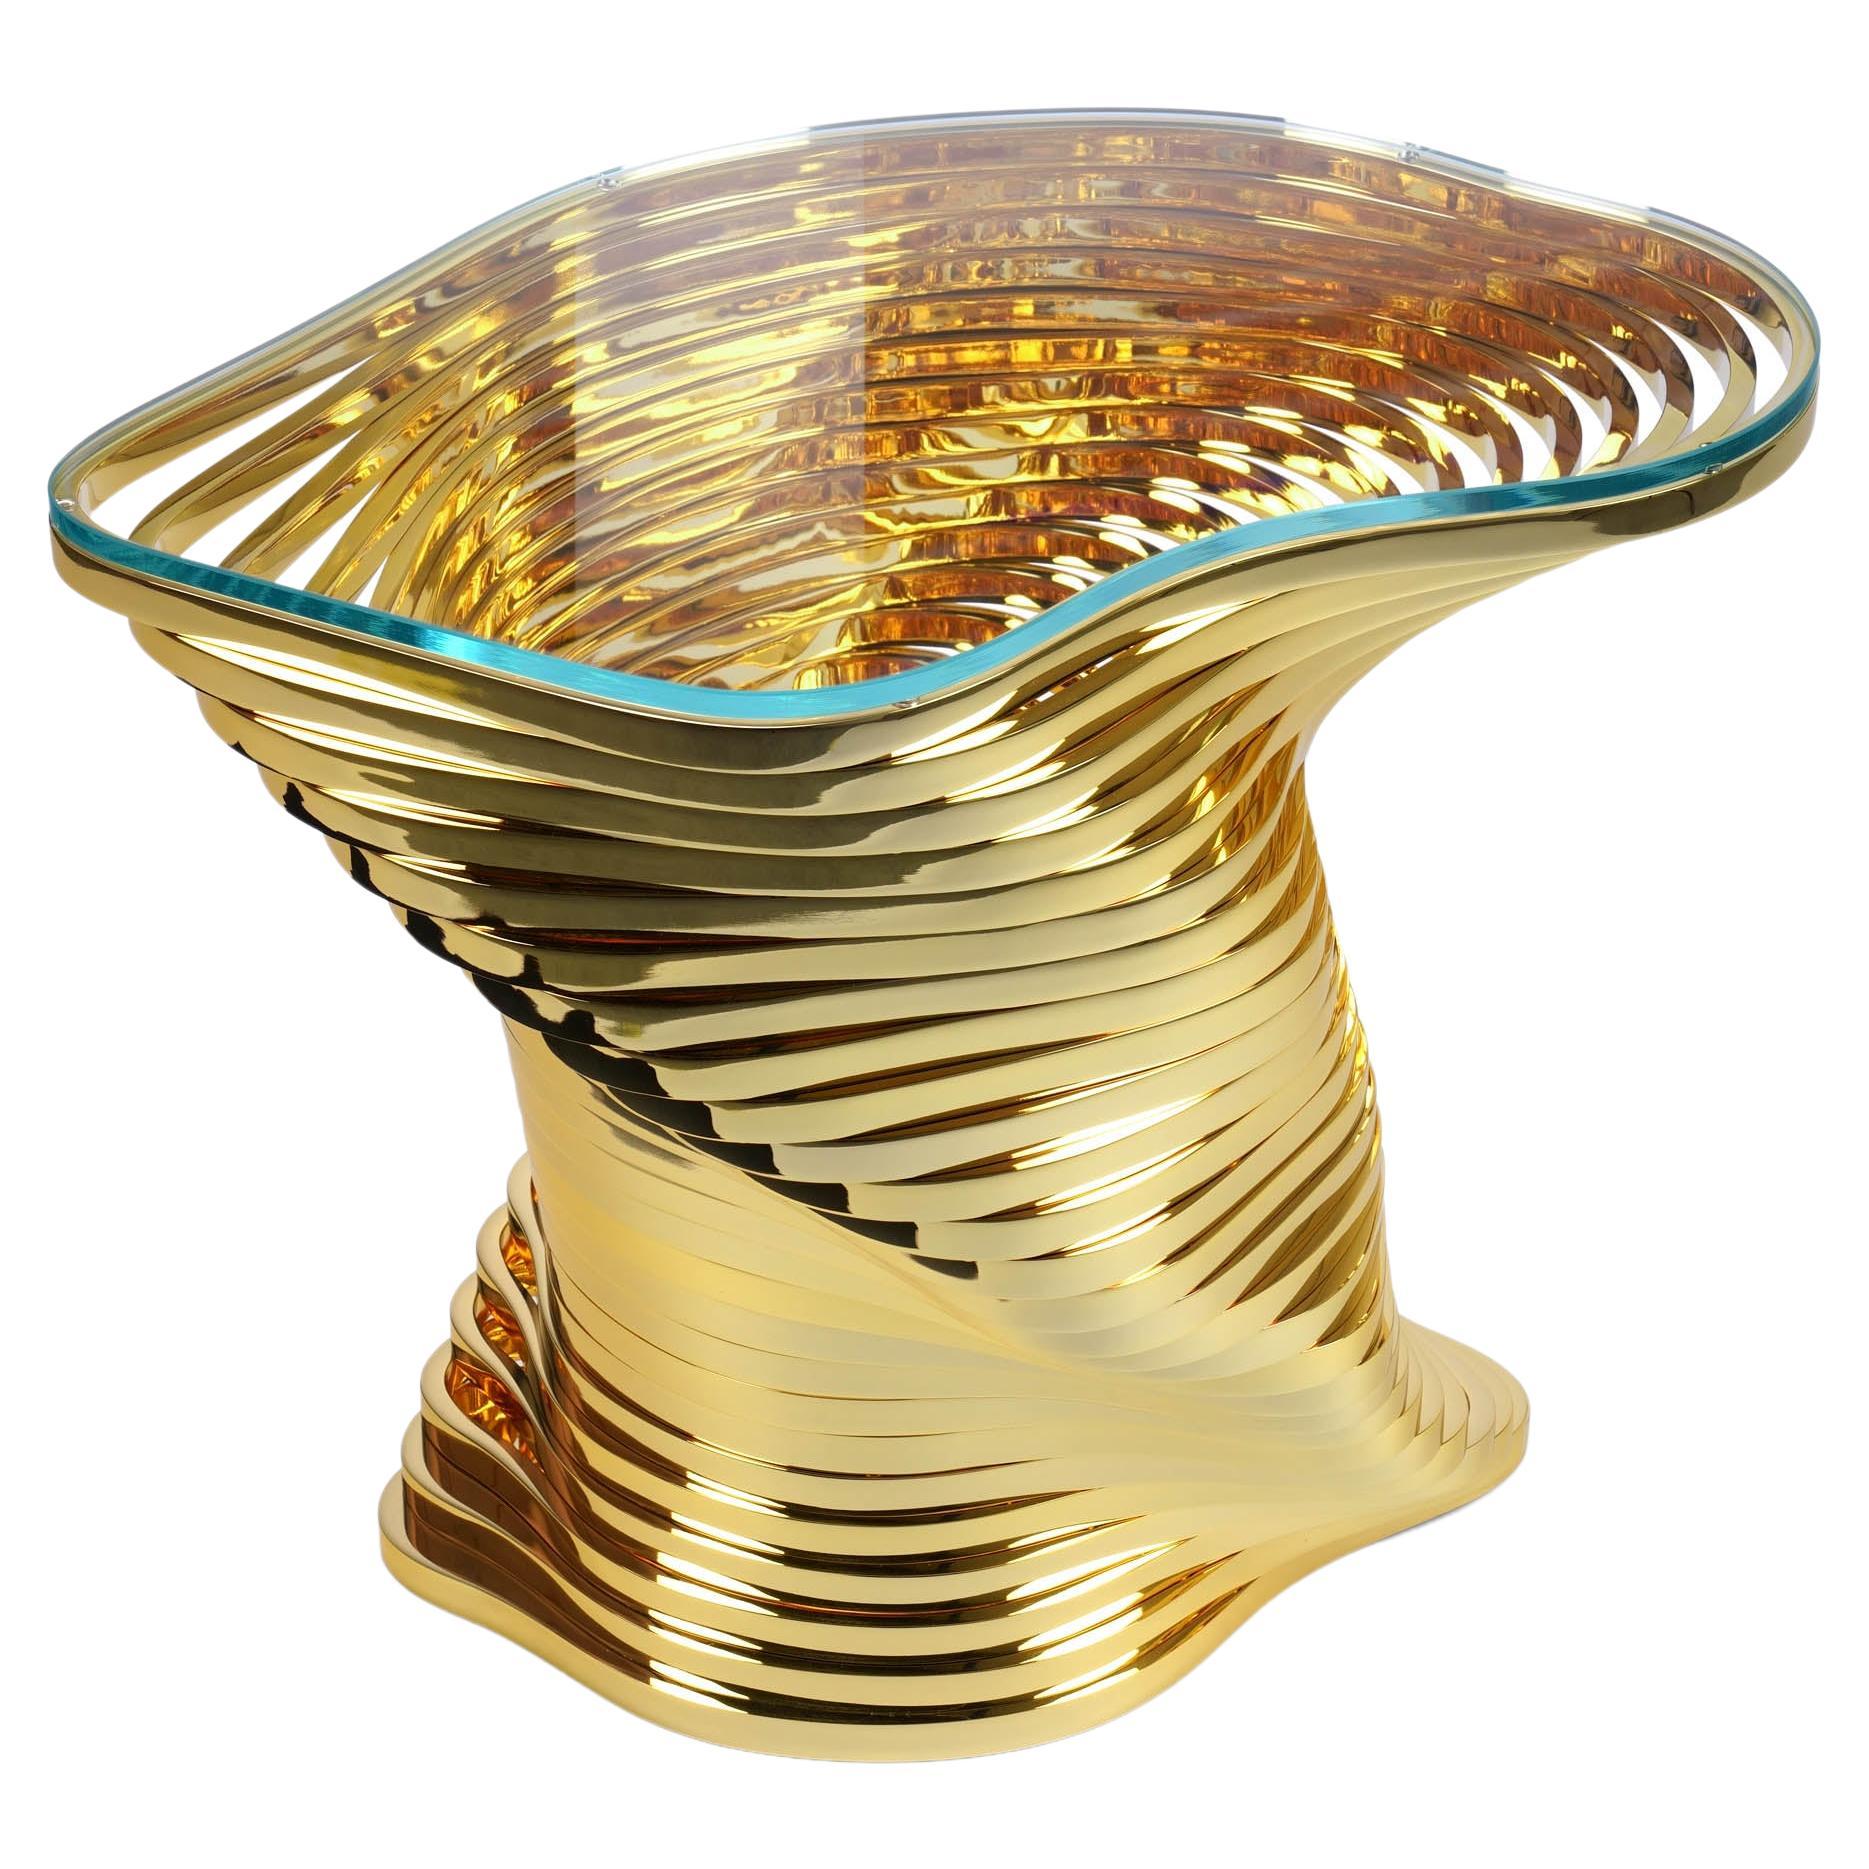 The Vertigo Gold sculptural side table is made up of 28 stainless steel elements meticulously mirror polished and plated one by one in precious 24 kt gold. A real jewel that has the power to hypnotize you among the reflections and sinuous lines that